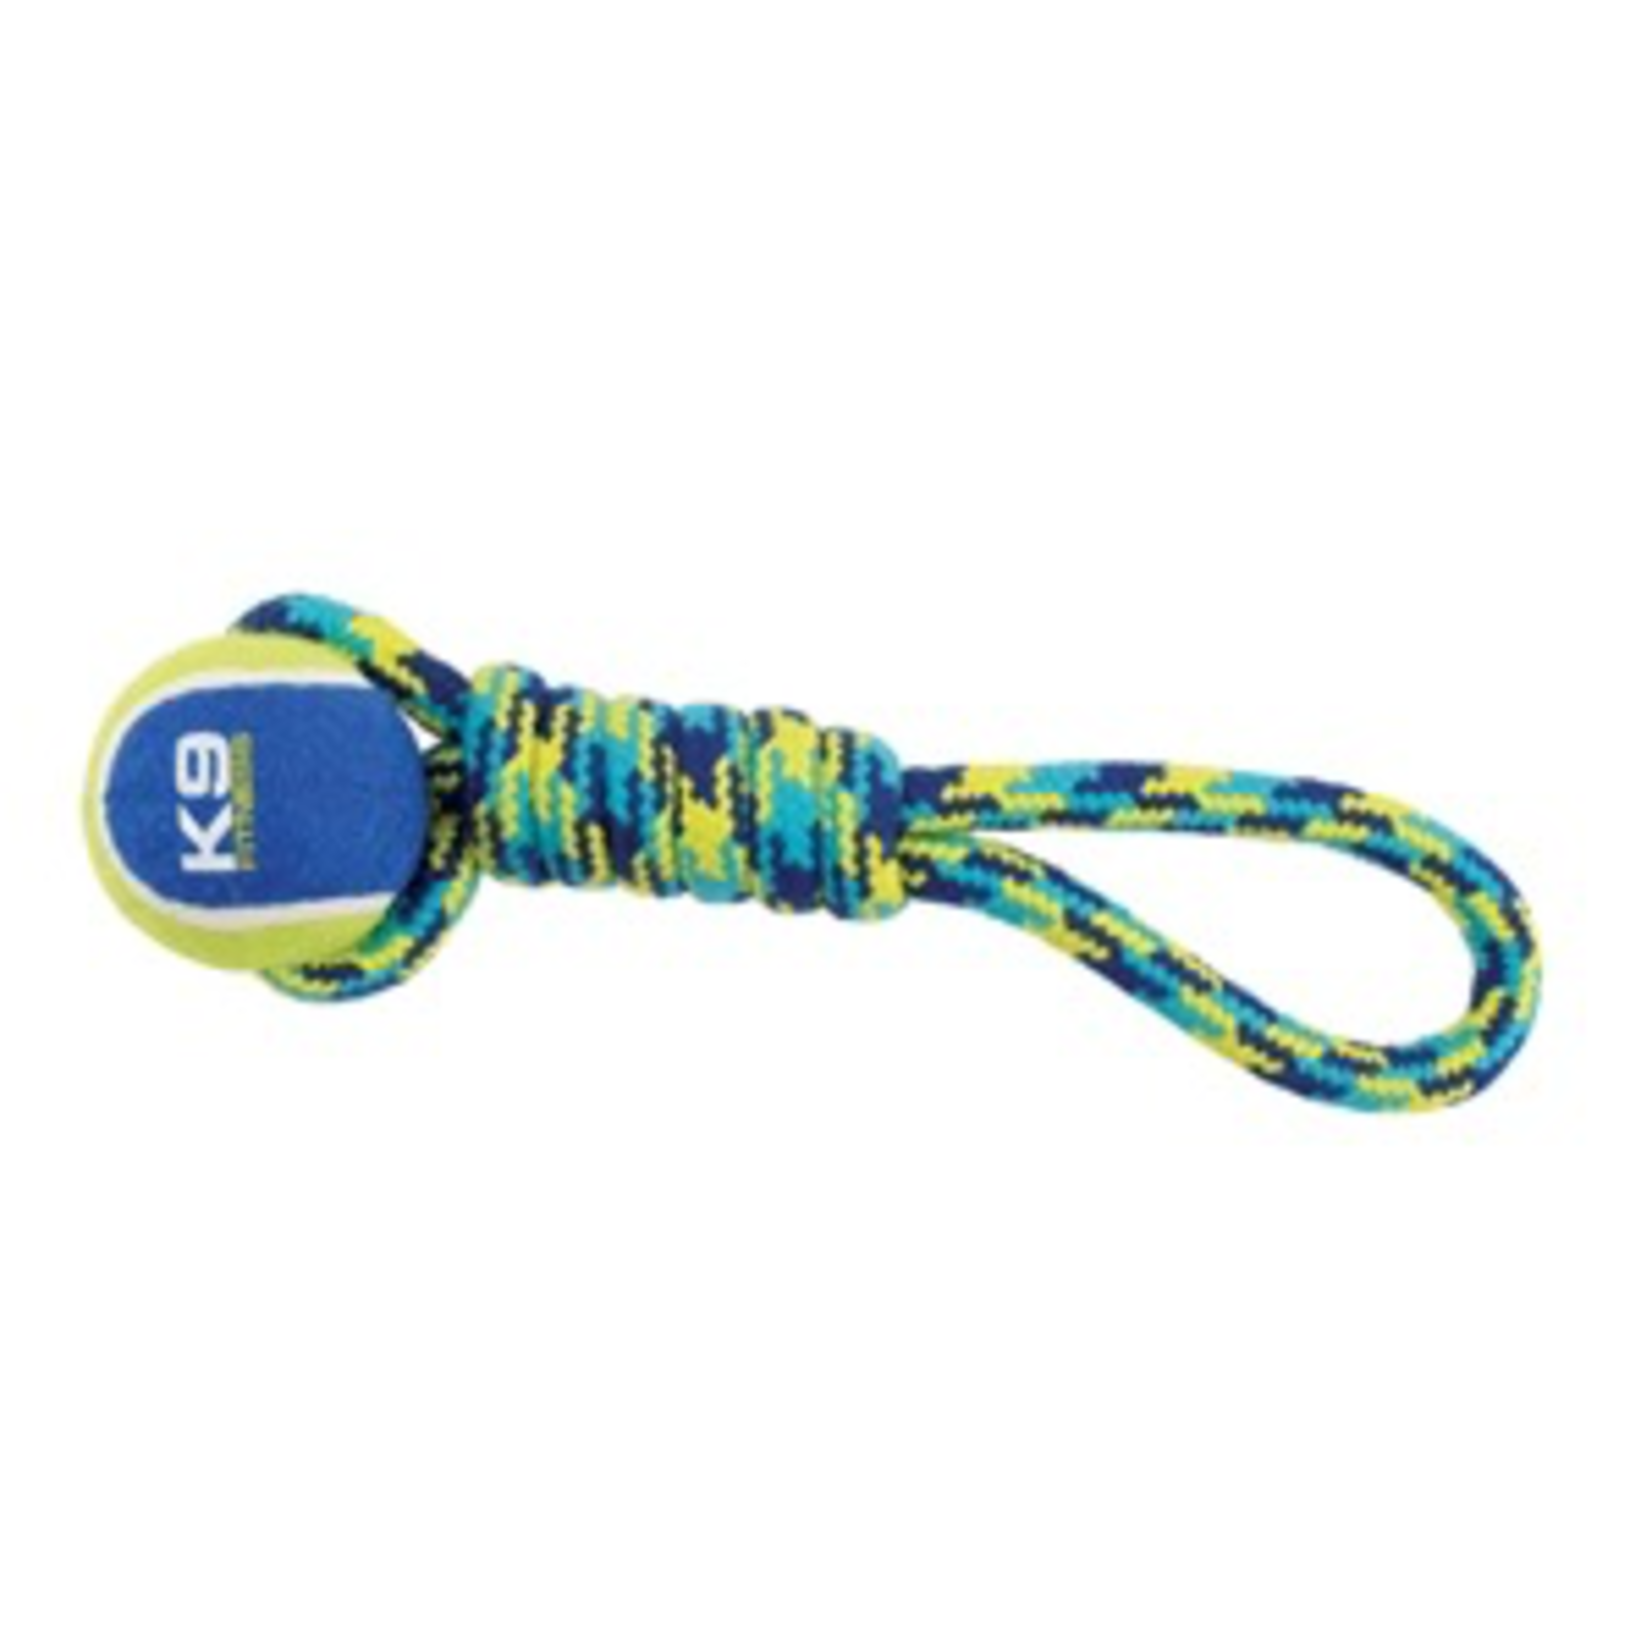 (W) K9 Fitness by Zeus Tennis Ball Rope Tug - 23 cm (9 in)